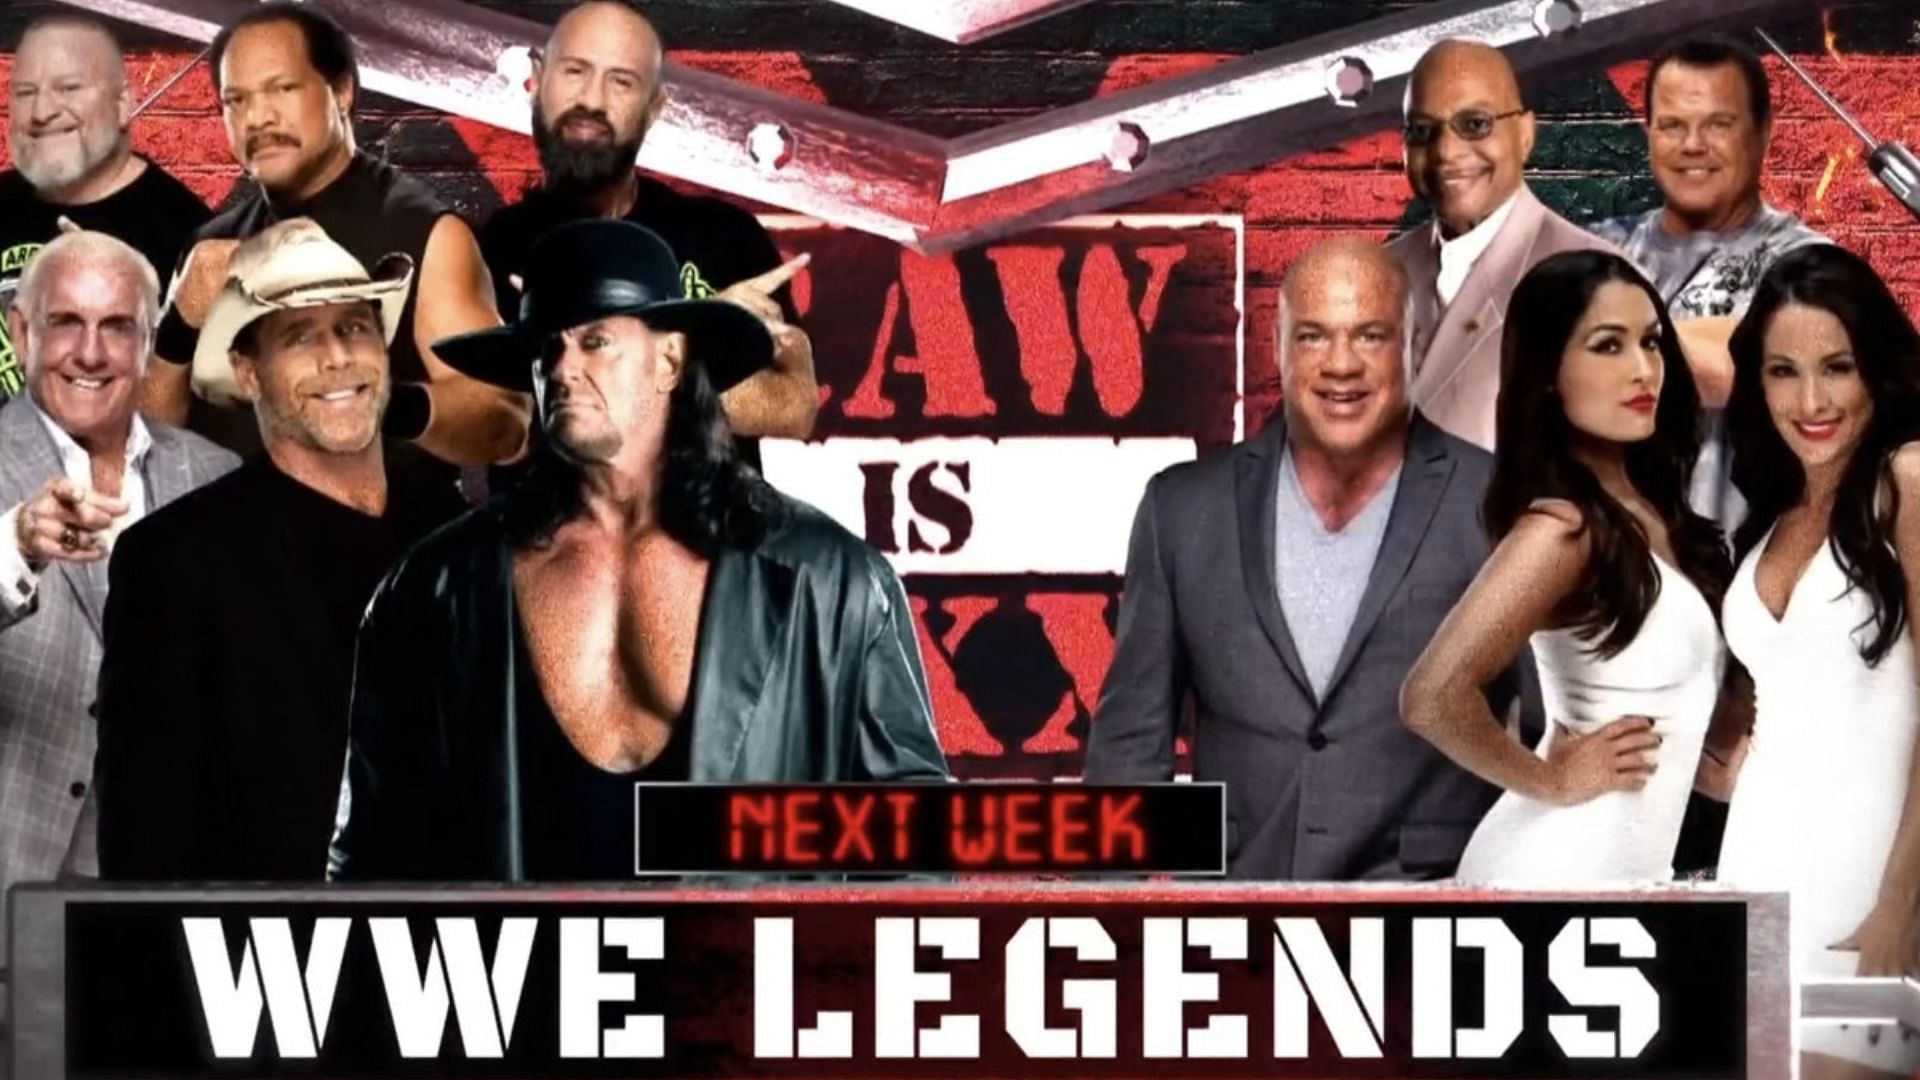 RAW is XXX next week will feature the return of some major WWE legends